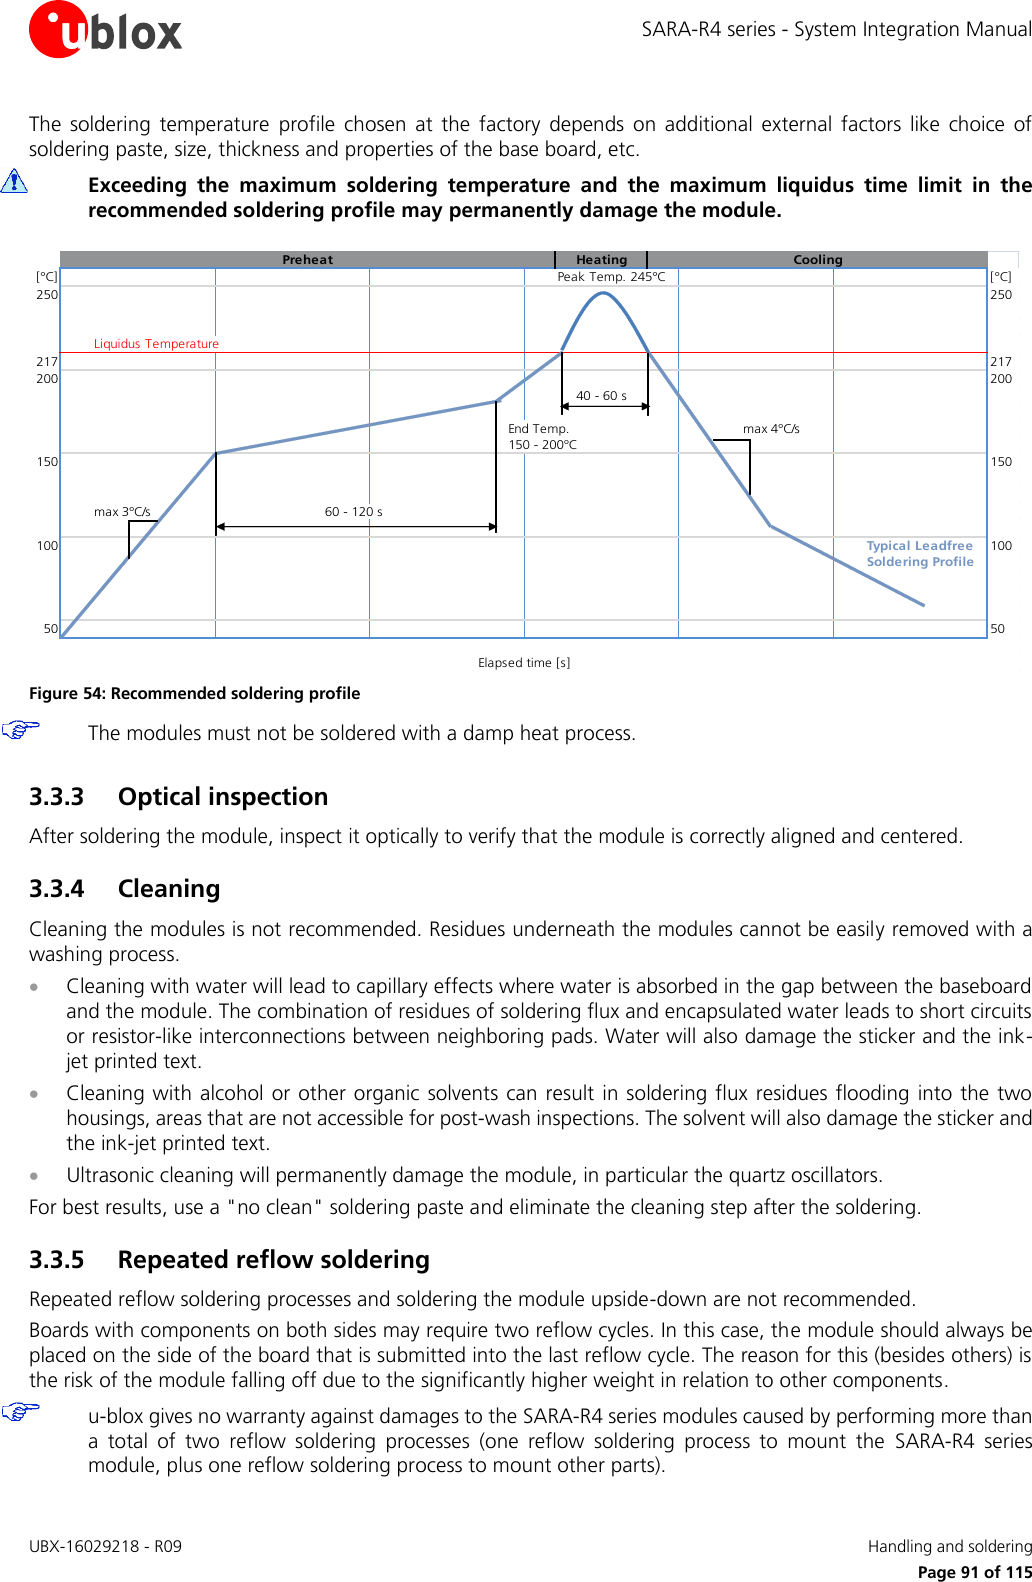 SARA-R4 series - System Integration Manual UBX-16029218 - R09    Handling and soldering     Page 91 of 115 The  soldering  temperature  profile  chosen  at  the  factory  depends  on  additional  external  factors  like  choice  of soldering paste, size, thickness and properties of the base board, etc.   Exceeding  the  maximum  soldering  temperature  and  the  maximum  liquidus  time  limit  in  the recommended soldering profile may permanently damage the module.  Preheat Heating Cooling[°C] Peak Temp. 245°C [°C]250 250Liquidus Temperature217 217200 20040 - 60 sEnd Temp.max 4°C/s150 - 200°C150 150max 3°C/s60 - 120 s100 Typical Leadfree 100Soldering Profile50 50Elapsed time [s] Figure 54: Recommended soldering profile  The modules must not be soldered with a damp heat process.  3.3.3 Optical inspection After soldering the module, inspect it optically to verify that the module is correctly aligned and centered. 3.3.4 Cleaning Cleaning the modules is not recommended. Residues underneath the modules cannot be easily removed with a washing process.  Cleaning with water will lead to capillary effects where water is absorbed in the gap between the baseboard and the module. The combination of residues of soldering flux and encapsulated water leads to short circuits or resistor-like interconnections between neighboring pads. Water will also damage the sticker and the ink-jet printed text.  Cleaning with alcohol or other organic solvents can result in soldering flux residues  flooding  into the two housings, areas that are not accessible for post-wash inspections. The solvent will also damage the sticker and the ink-jet printed text.  Ultrasonic cleaning will permanently damage the module, in particular the quartz oscillators. For best results, use a &quot;no clean&quot; soldering paste and eliminate the cleaning step after the soldering. 3.3.5 Repeated reflow soldering Repeated reflow soldering processes and soldering the module upside-down are not recommended. Boards with components on both sides may require two reflow cycles. In this case, the module should always be placed on the side of the board that is submitted into the last reflow cycle. The reason for this (besides others) is the risk of the module falling off due to the significantly higher weight in relation to other components.  u-blox gives no warranty against damages to the SARA-R4 series modules caused by performing more than a  total  of  two  reflow  soldering  processes  (one  reflow  soldering  process  to  mount  the  SARA-R4  series module, plus one reflow soldering process to mount other parts).  